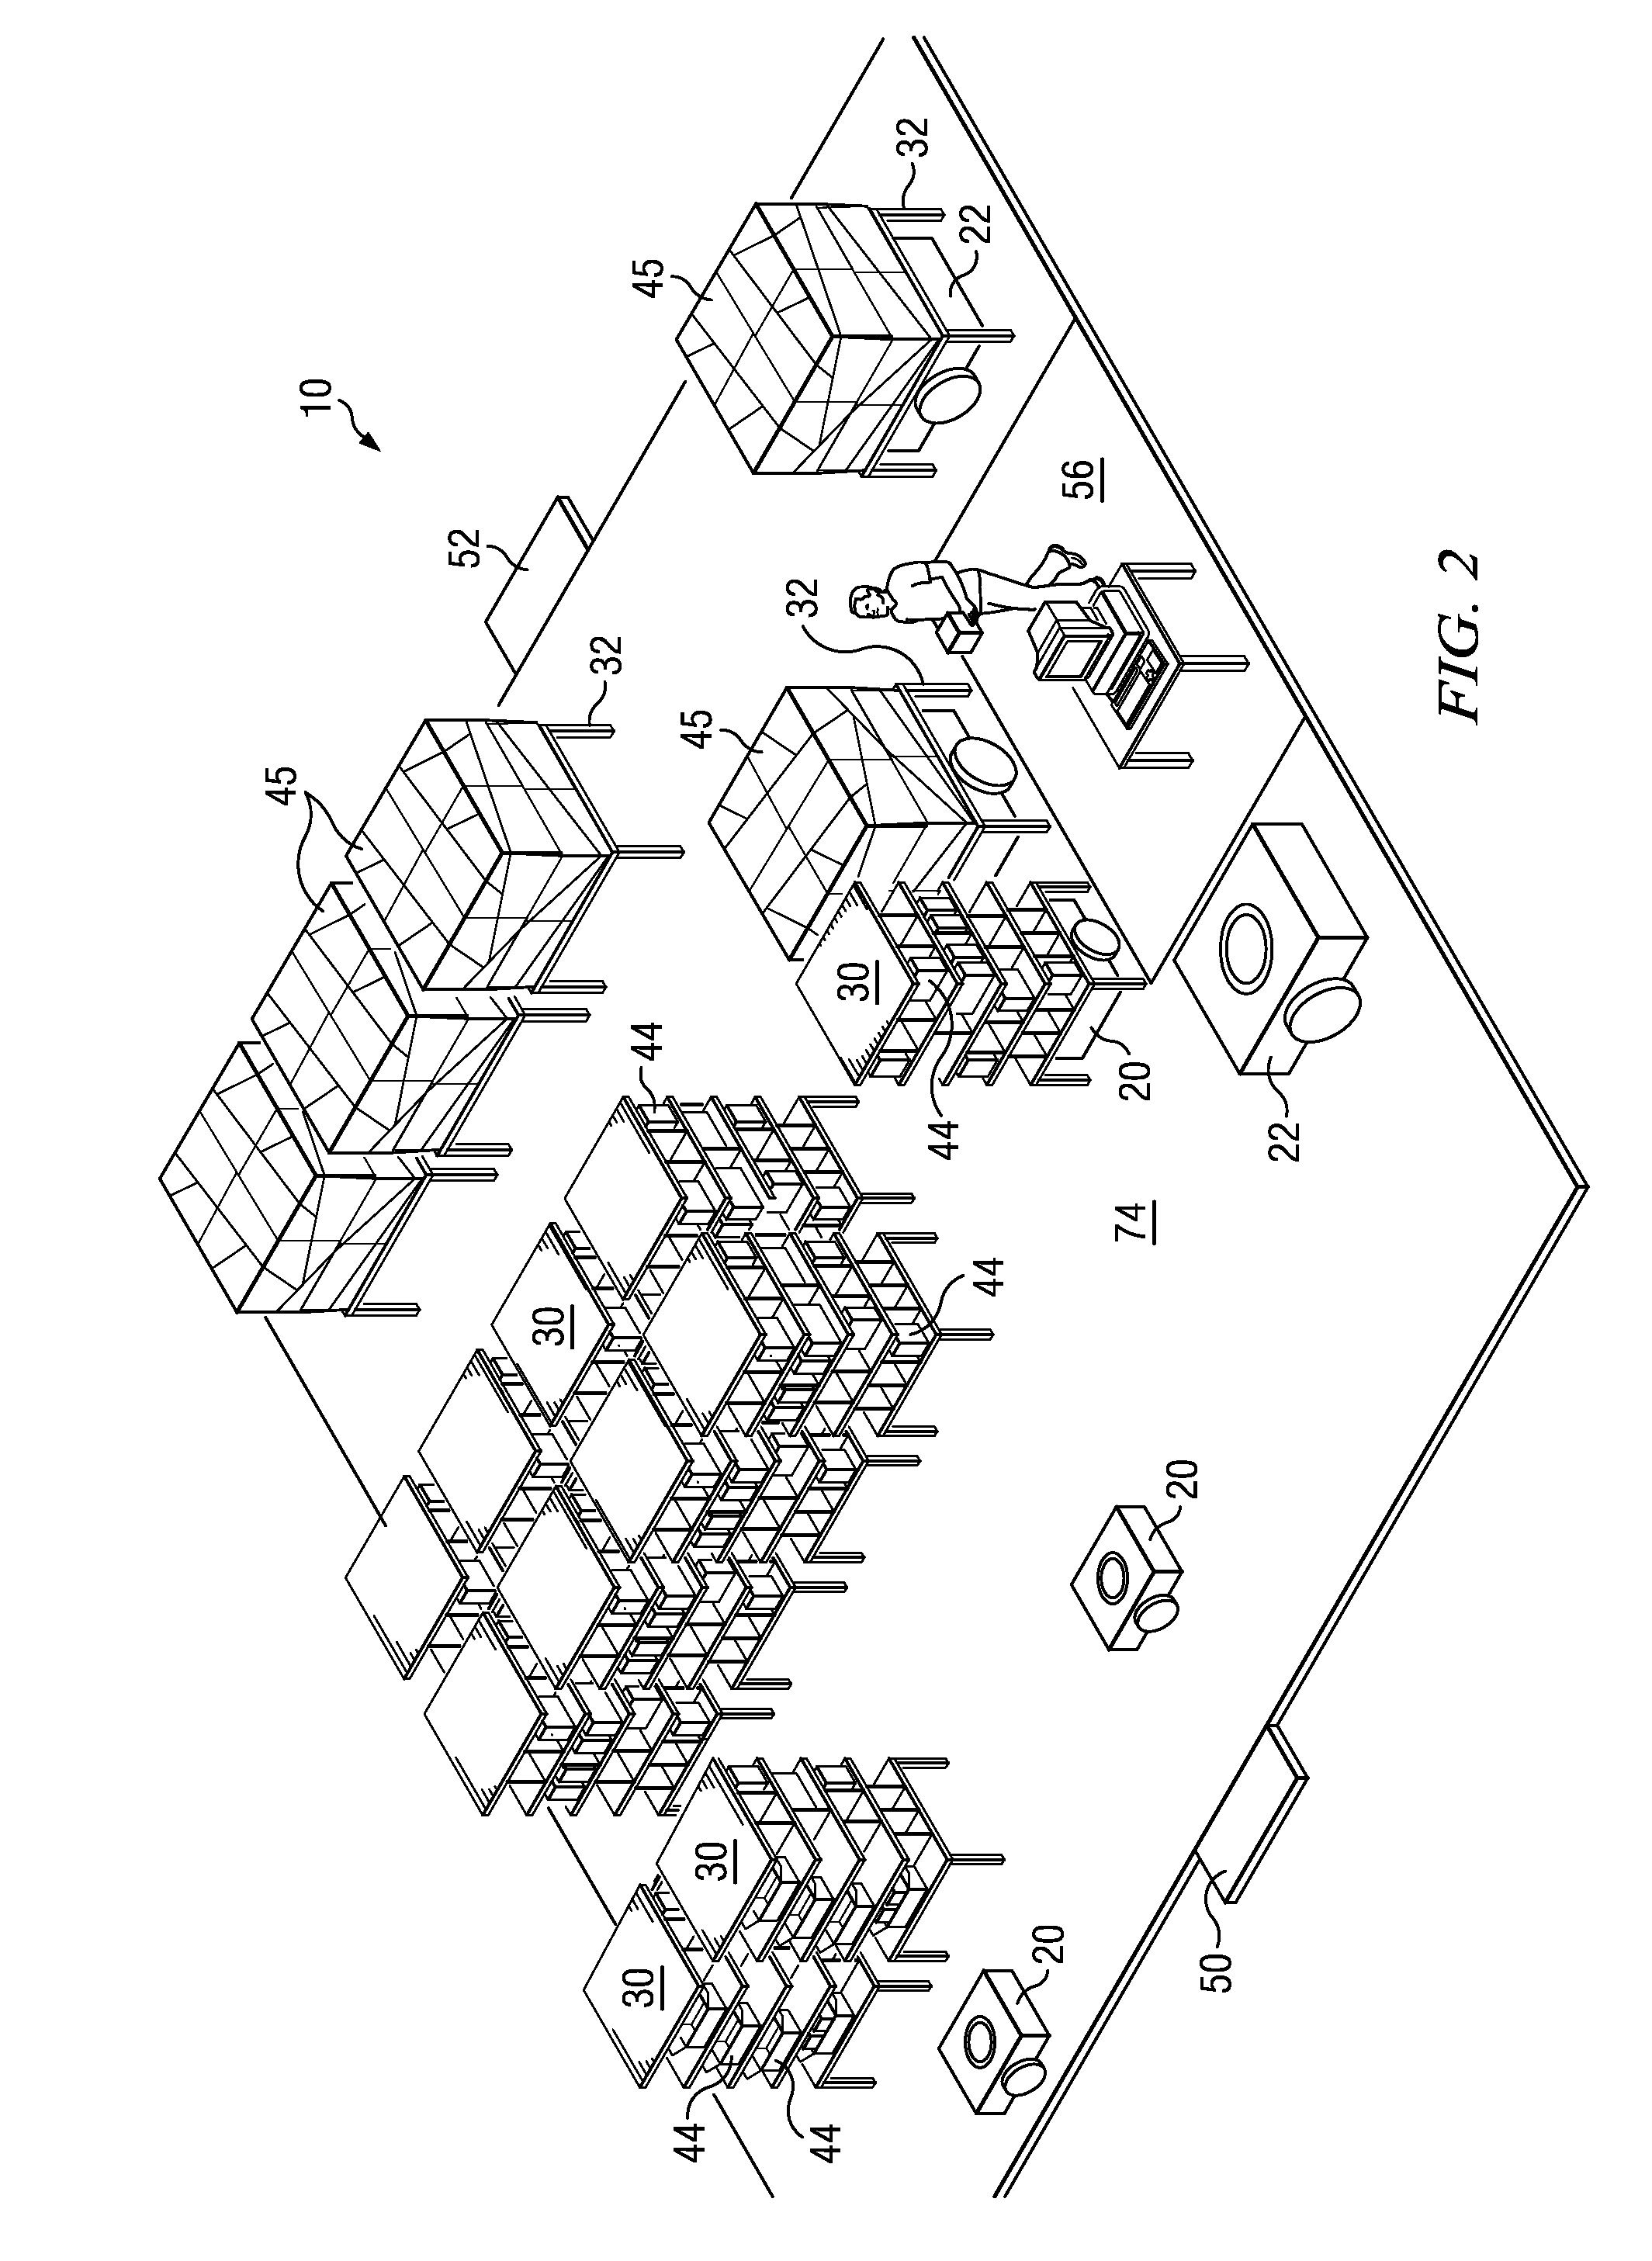 System and method for inventory management using mobile drive units